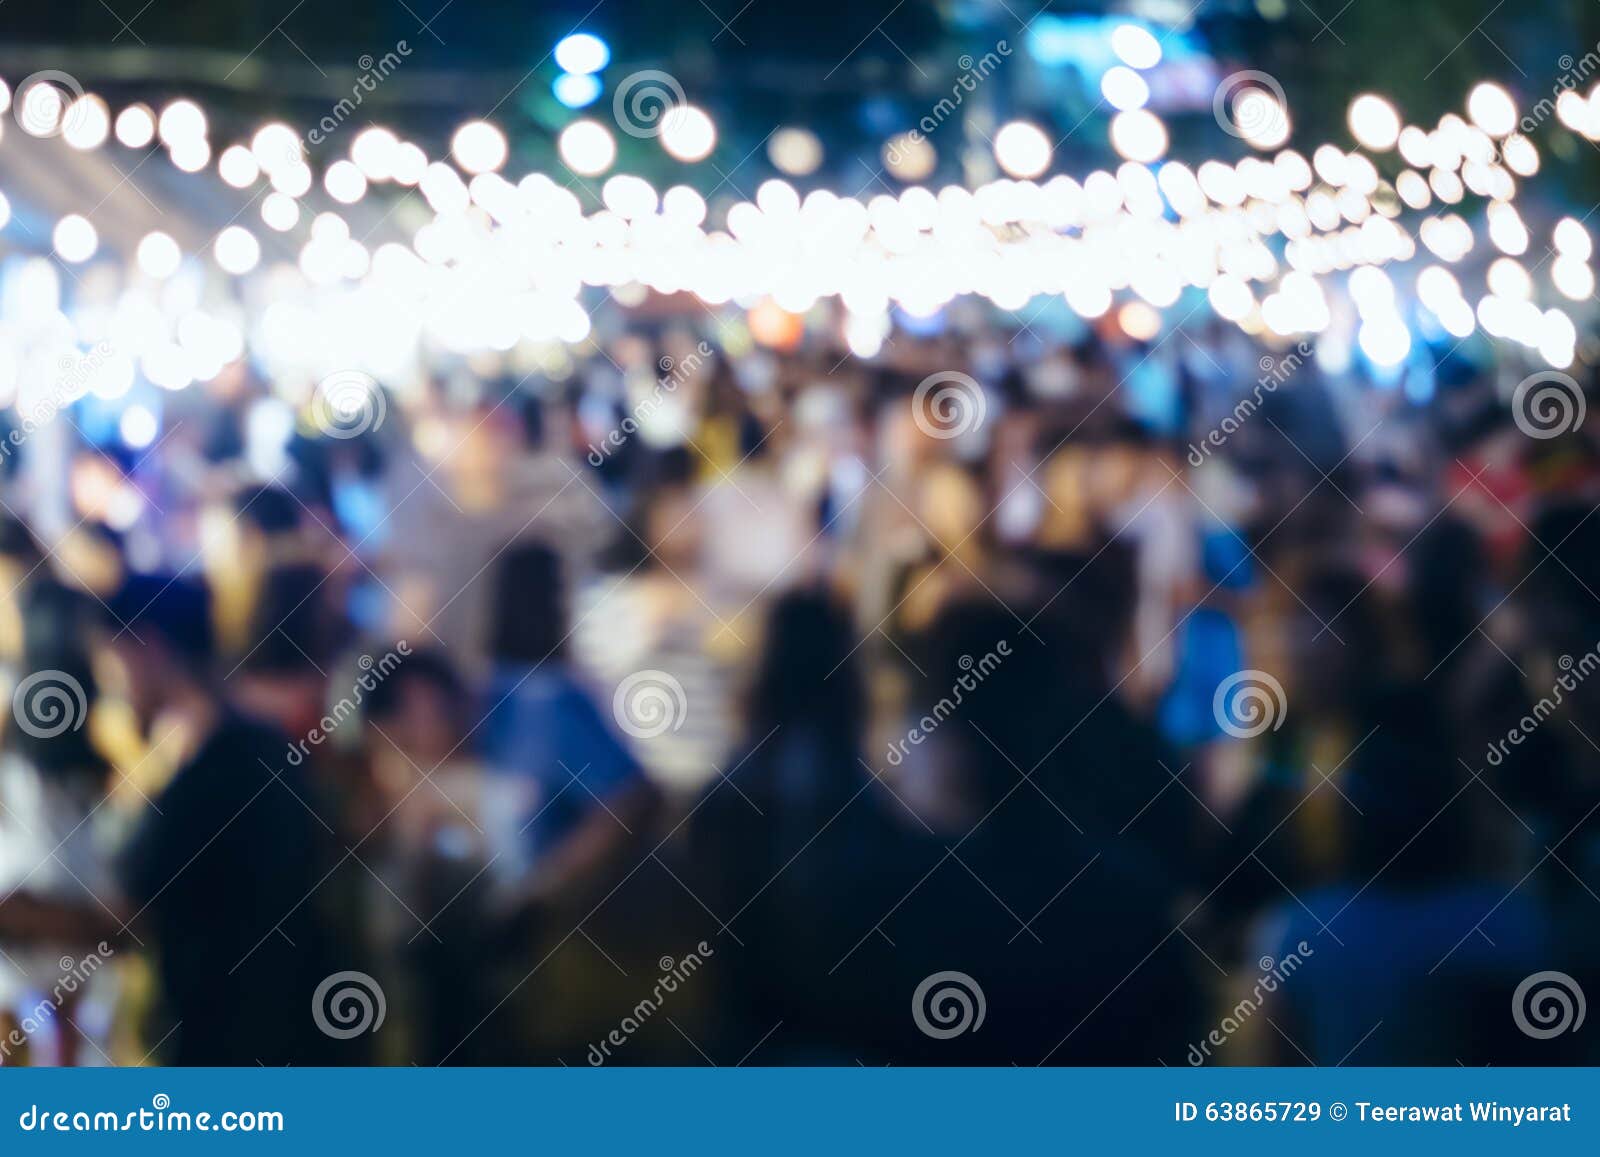 festival event party with people blurred background